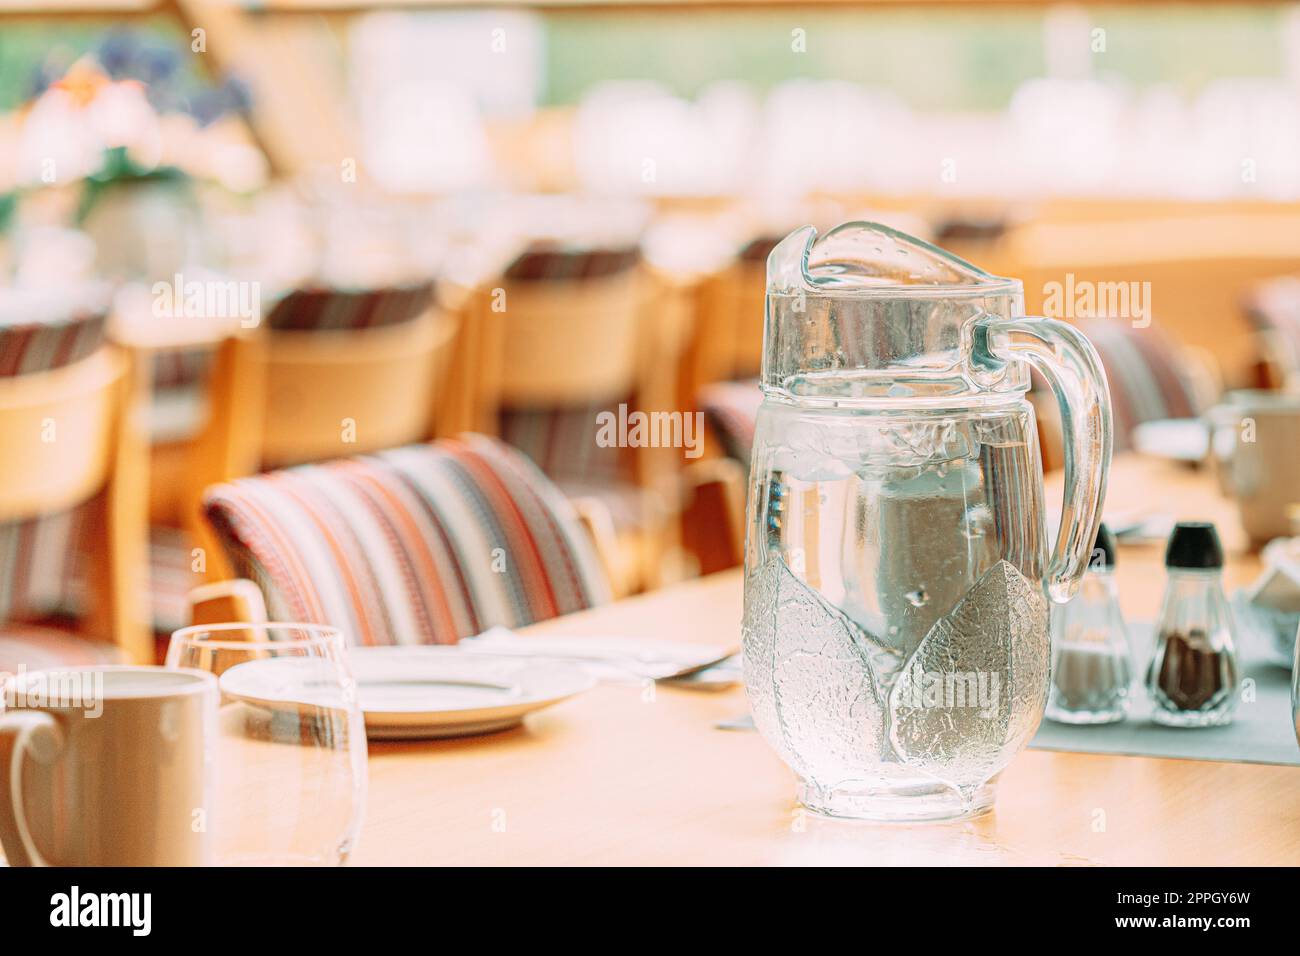 Cozy Interior Of Summer Cafe. Jug Of Icy Cold Ice Water On Table And Cutlery Laid Out Stock Photo